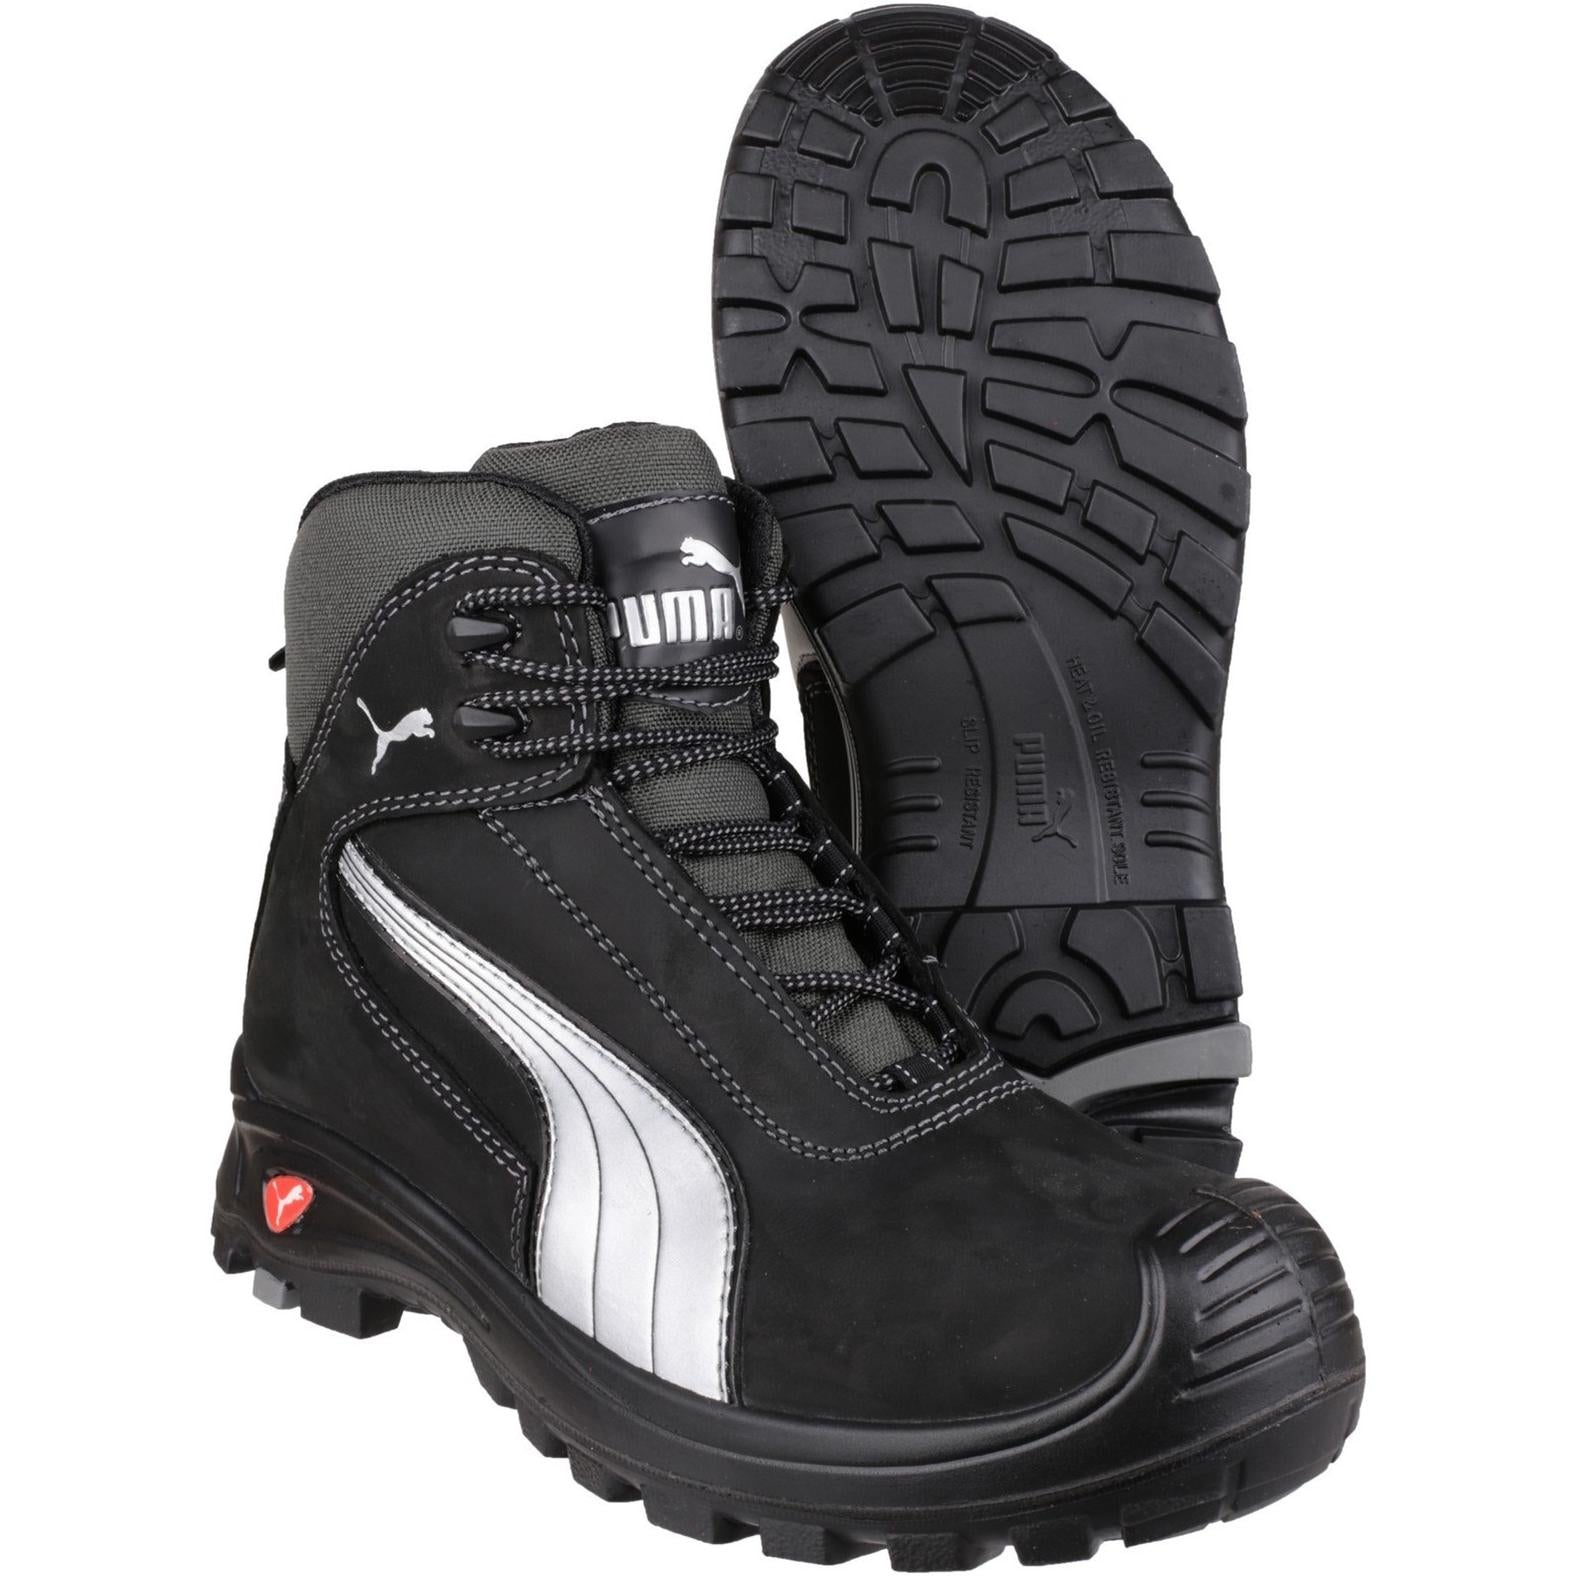 Puma Safety Cascades Mid S3 Safety Boot